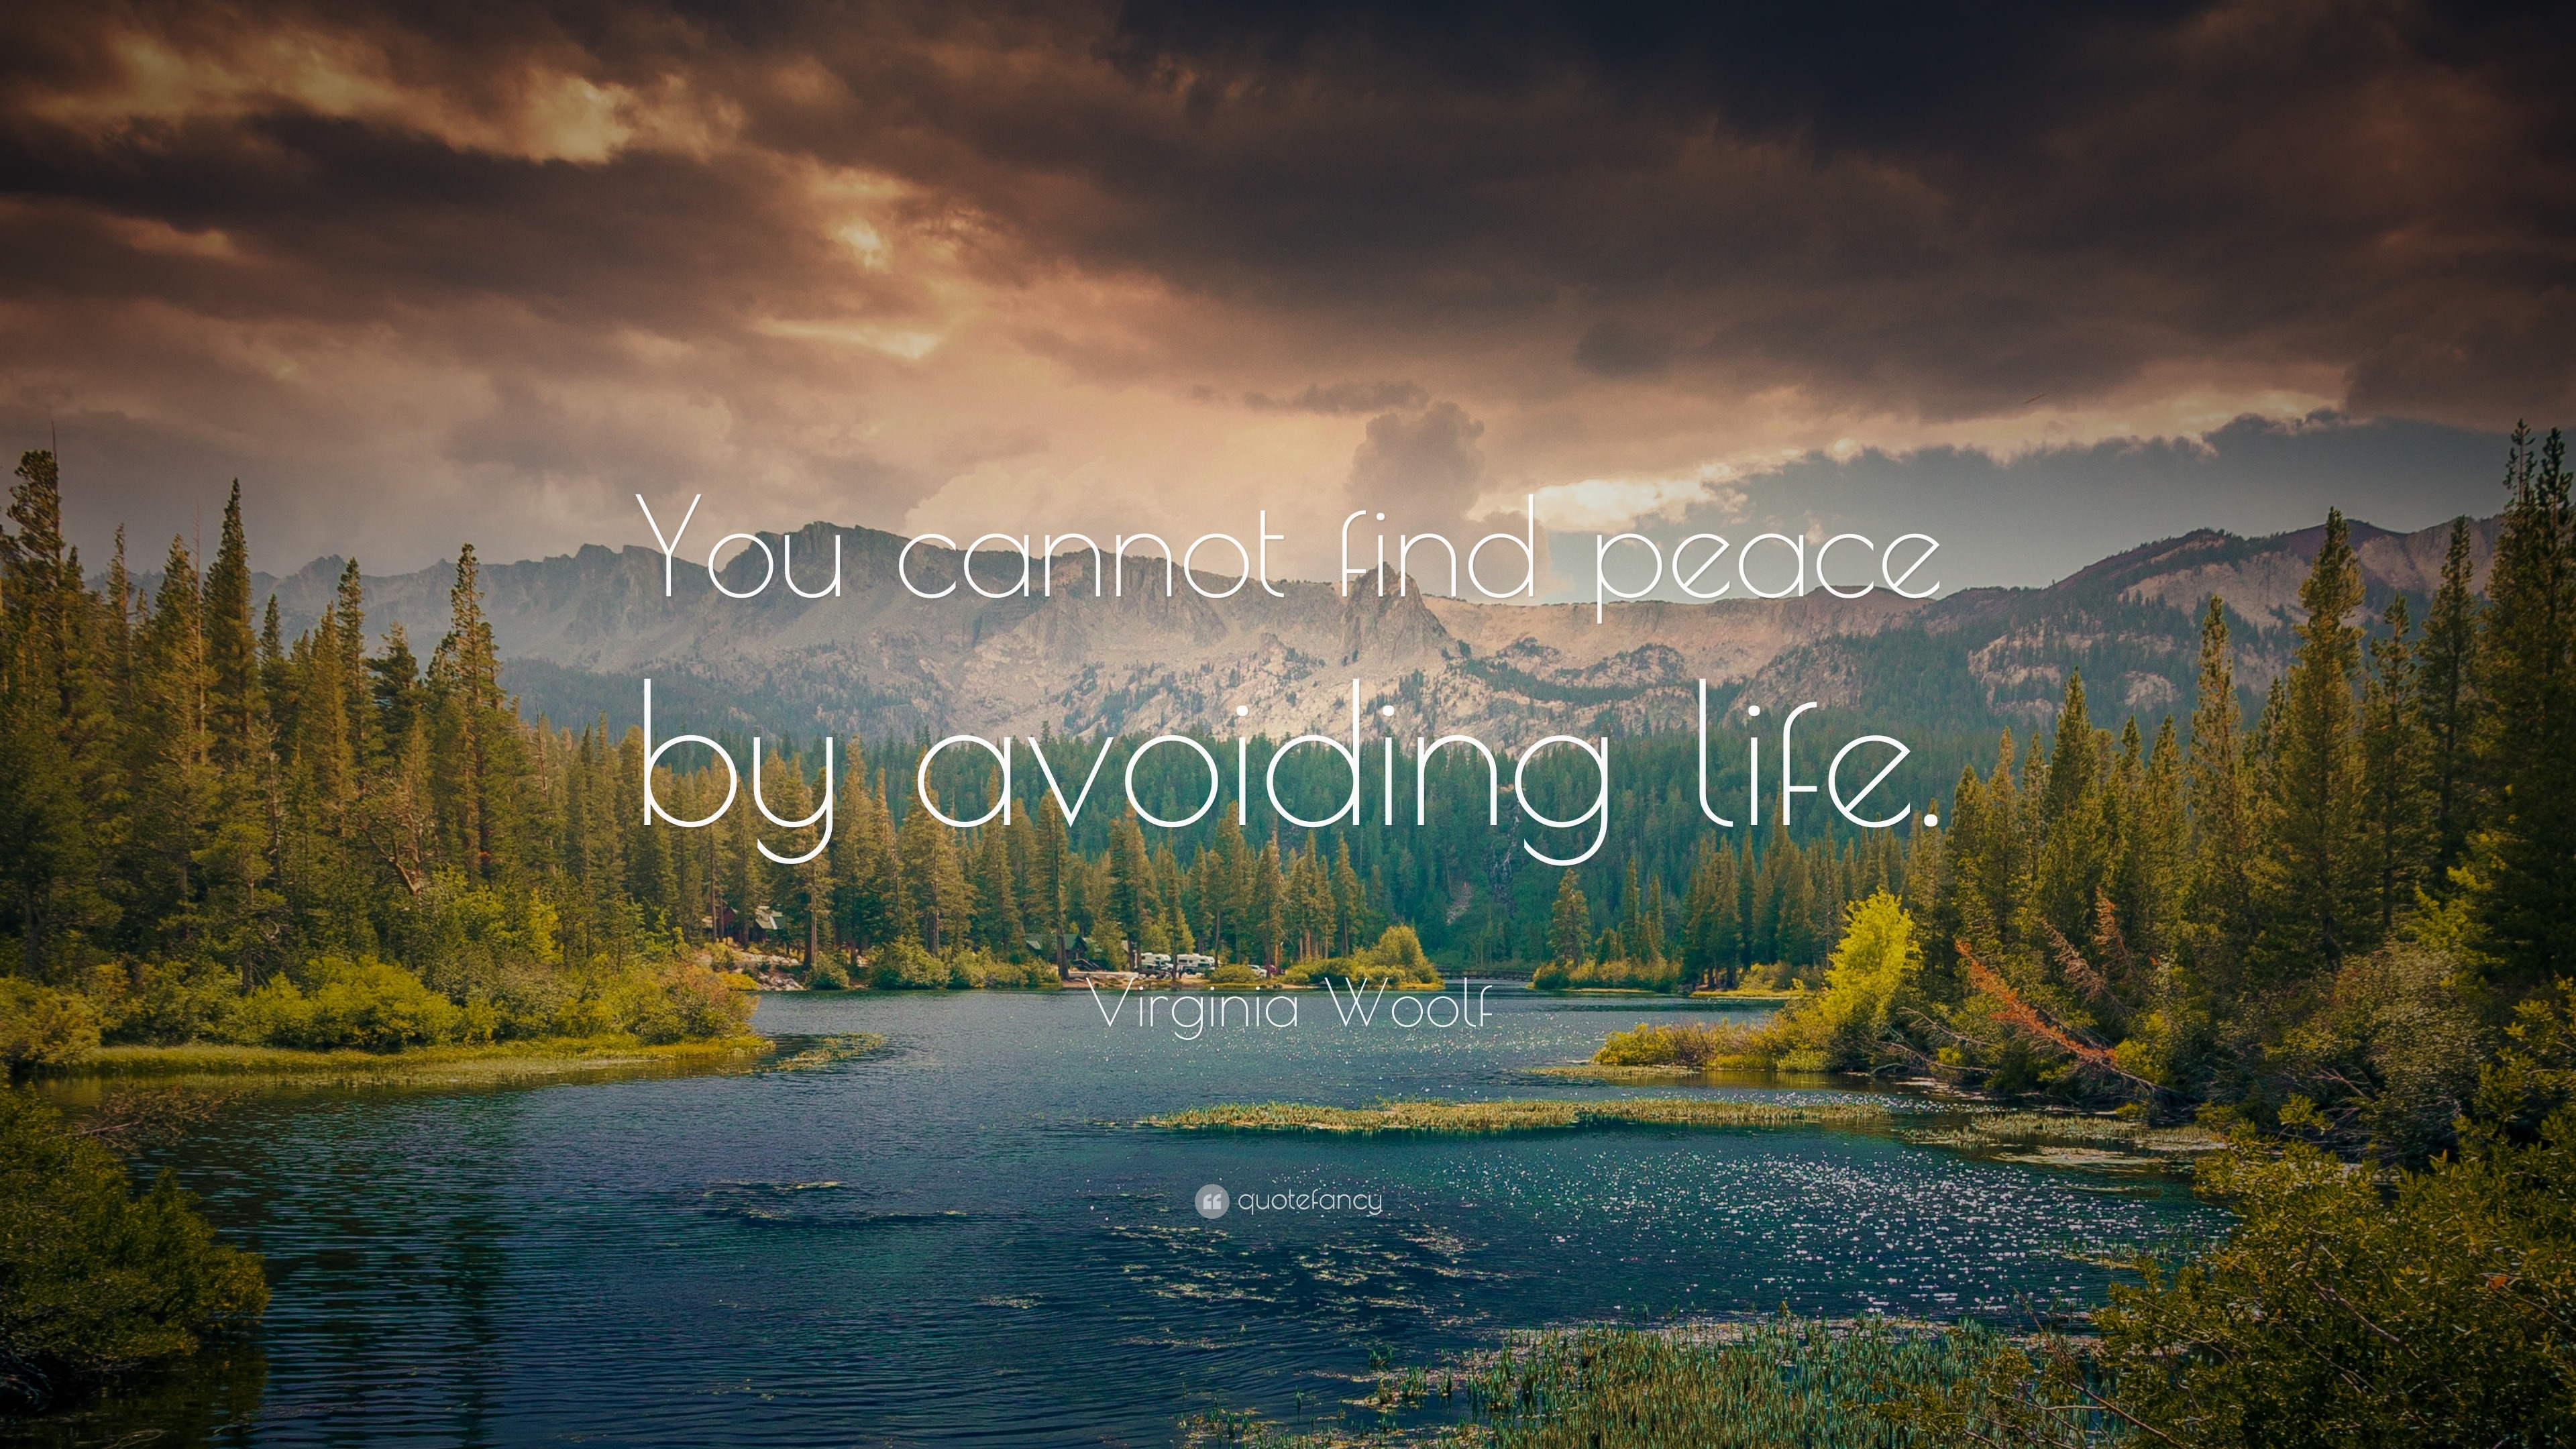 Virginia Woolf Quote: “You cannot find peace by avoiding life.”